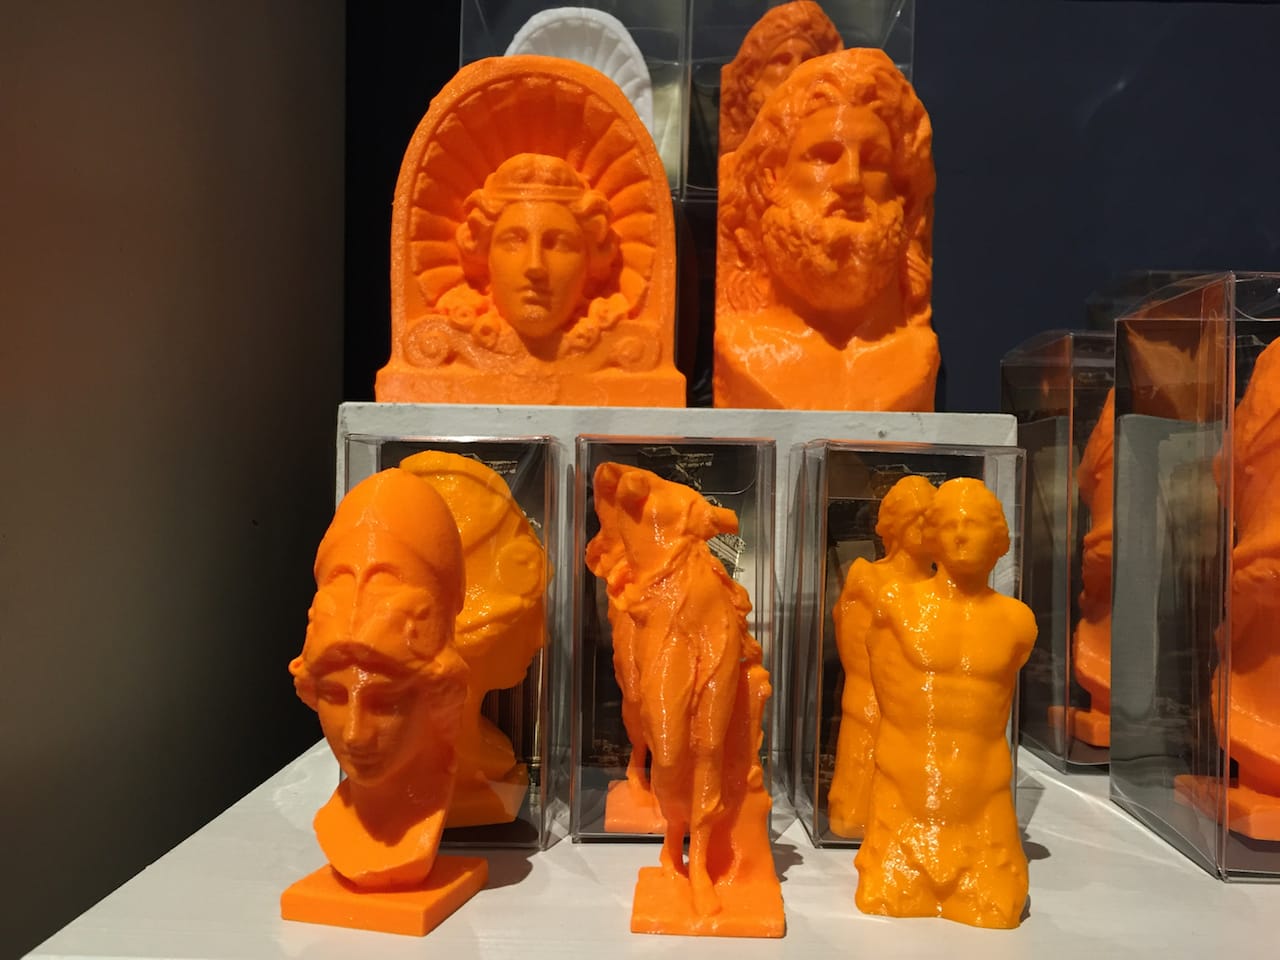  Could museum pieces be 3D printed on demand? 